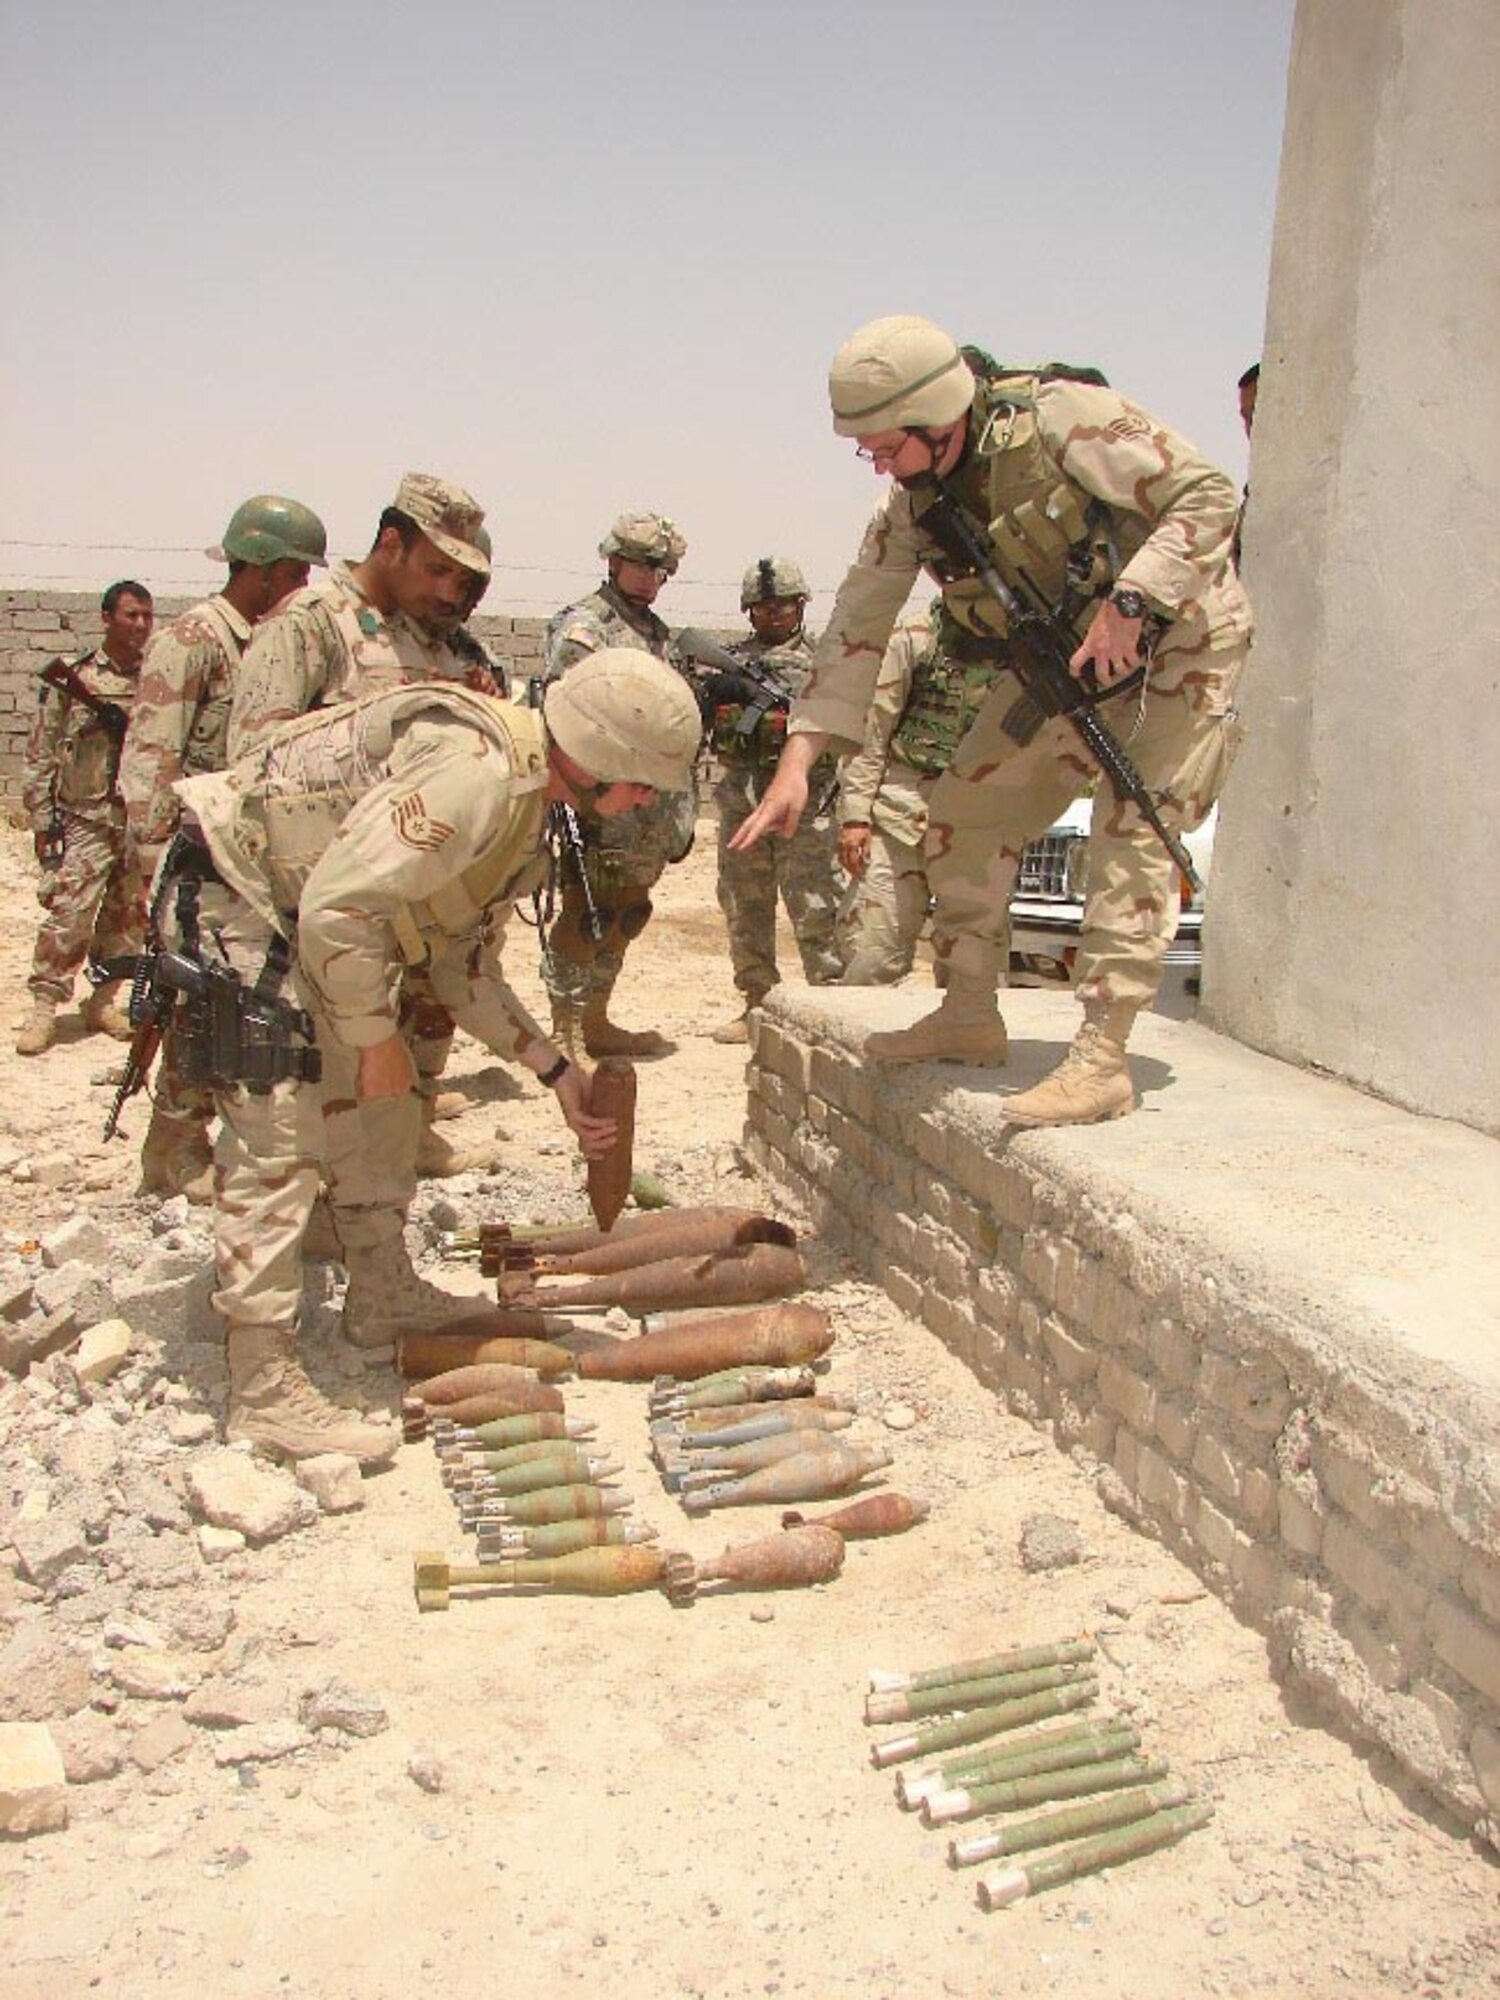 BALAD AIR BASE, Iraq - Staff Sgt. Kristoffer Solesbee (right) describes identification features and safety concerns of various UXOs as Staff Sgt. Christopher Stoup (left) shows the UXOs to Iraqi Army soldiers from the 5th Iraqi Army Bomb Disposal Company. (Courtesy photo)